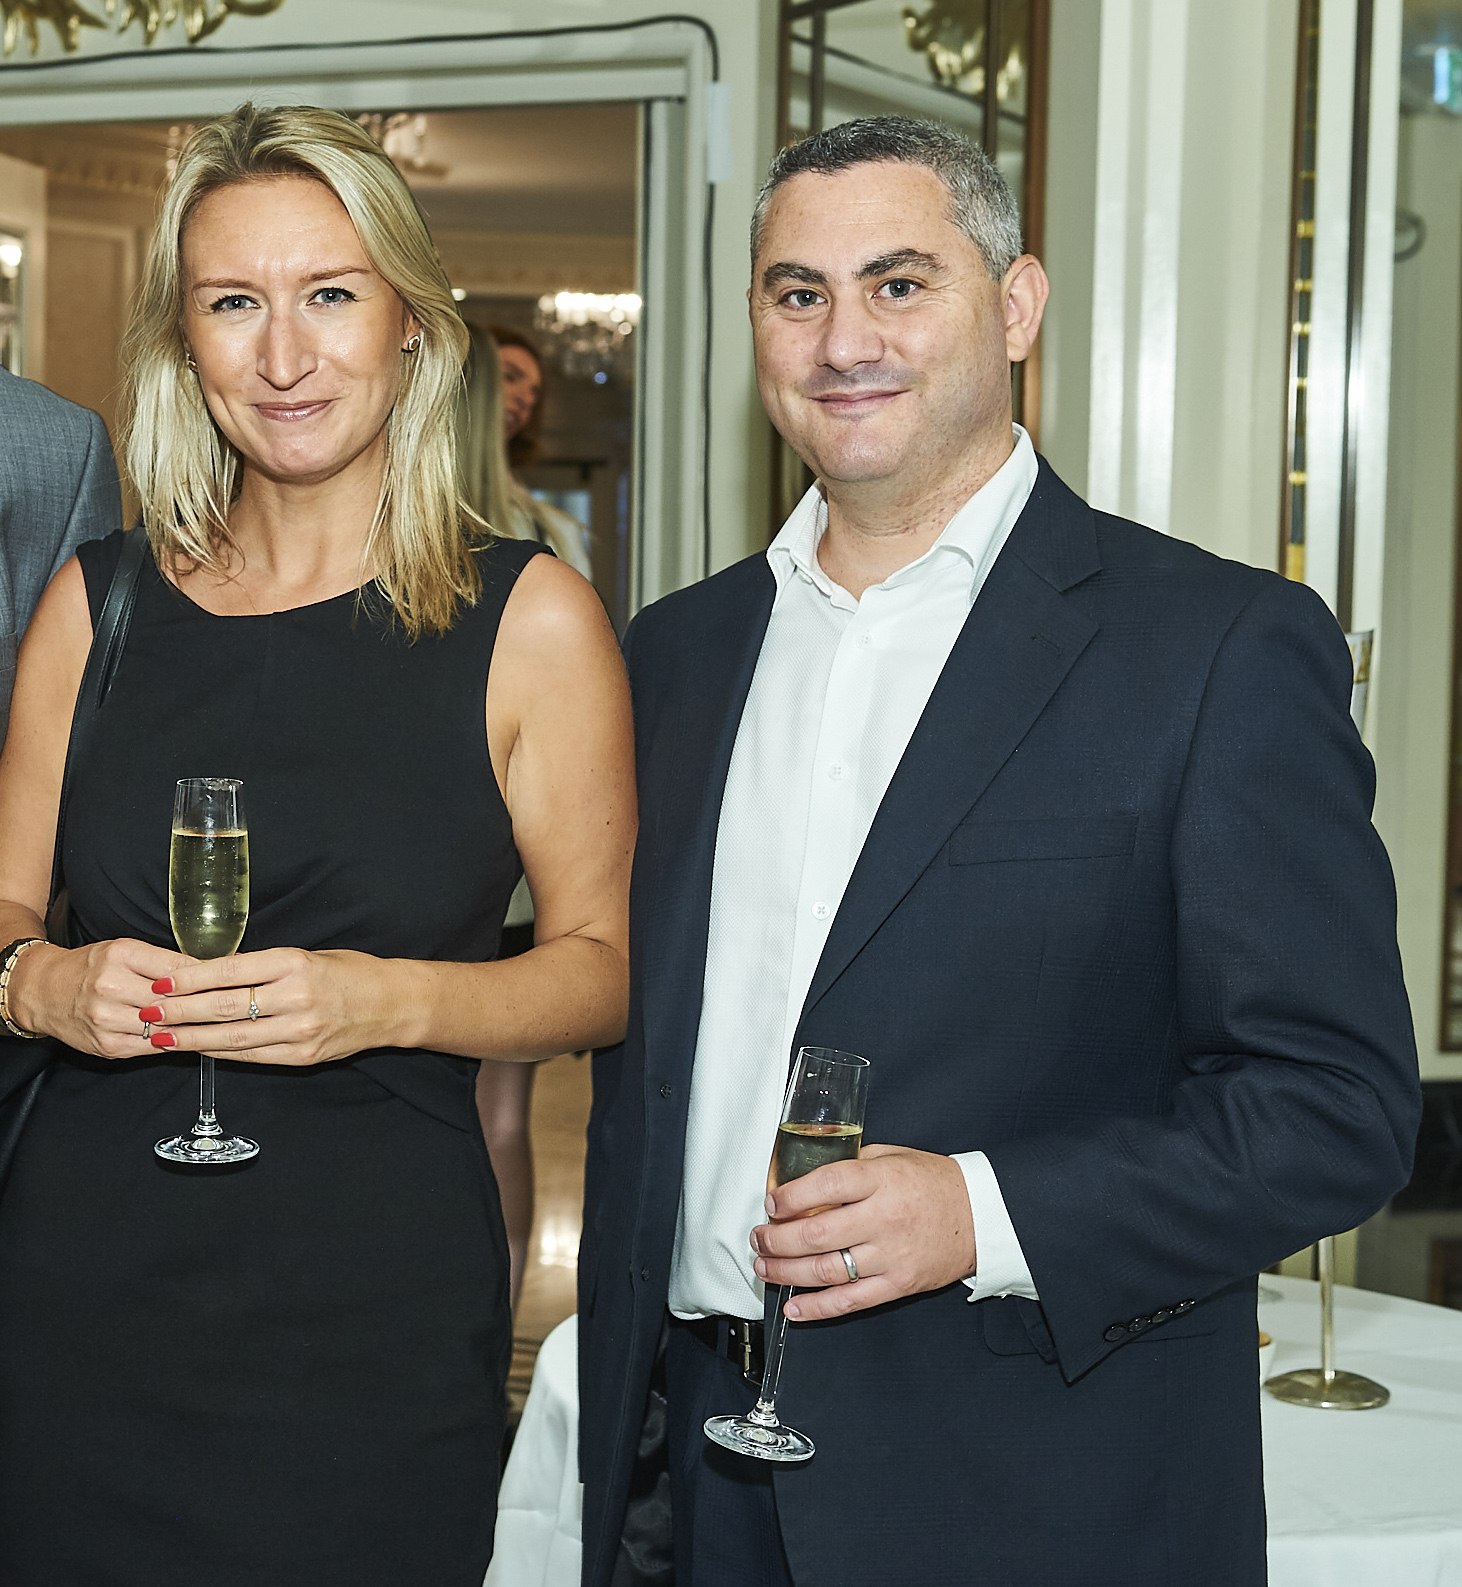 Above: Danilo’s managing director Daniel Prince (right) with Danilo’s national account manager, Anna Brown at a Retas event.